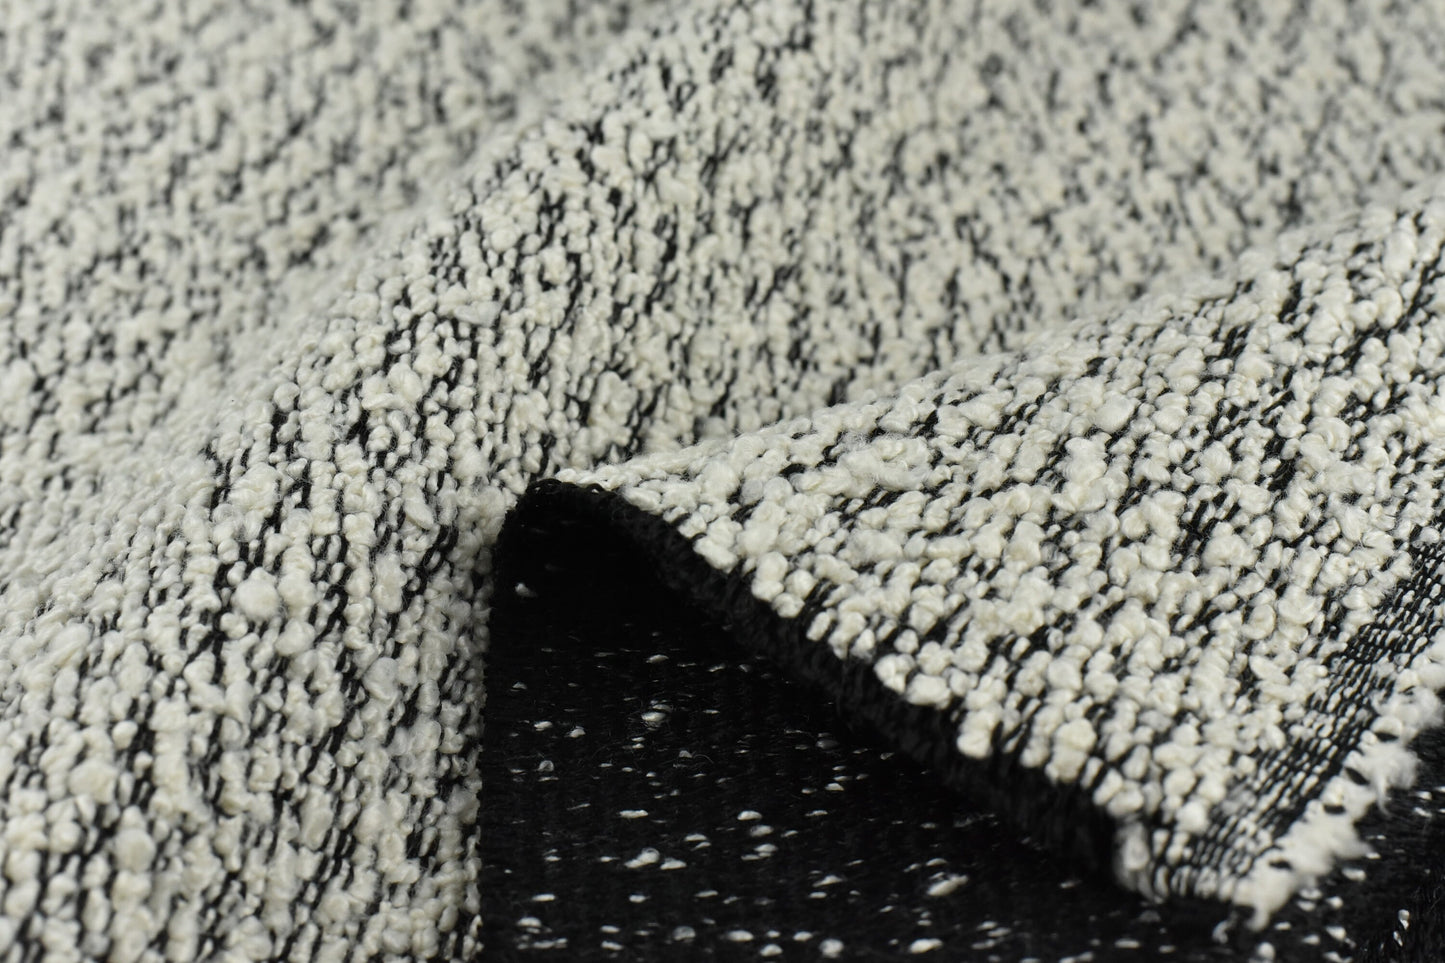 Extra Heavy Weight Big Curl Boucle Textured Upholstery Fabric in Black and White|Designer Boucle Fabric For Furniture Chair Sofa 55"/970GSM